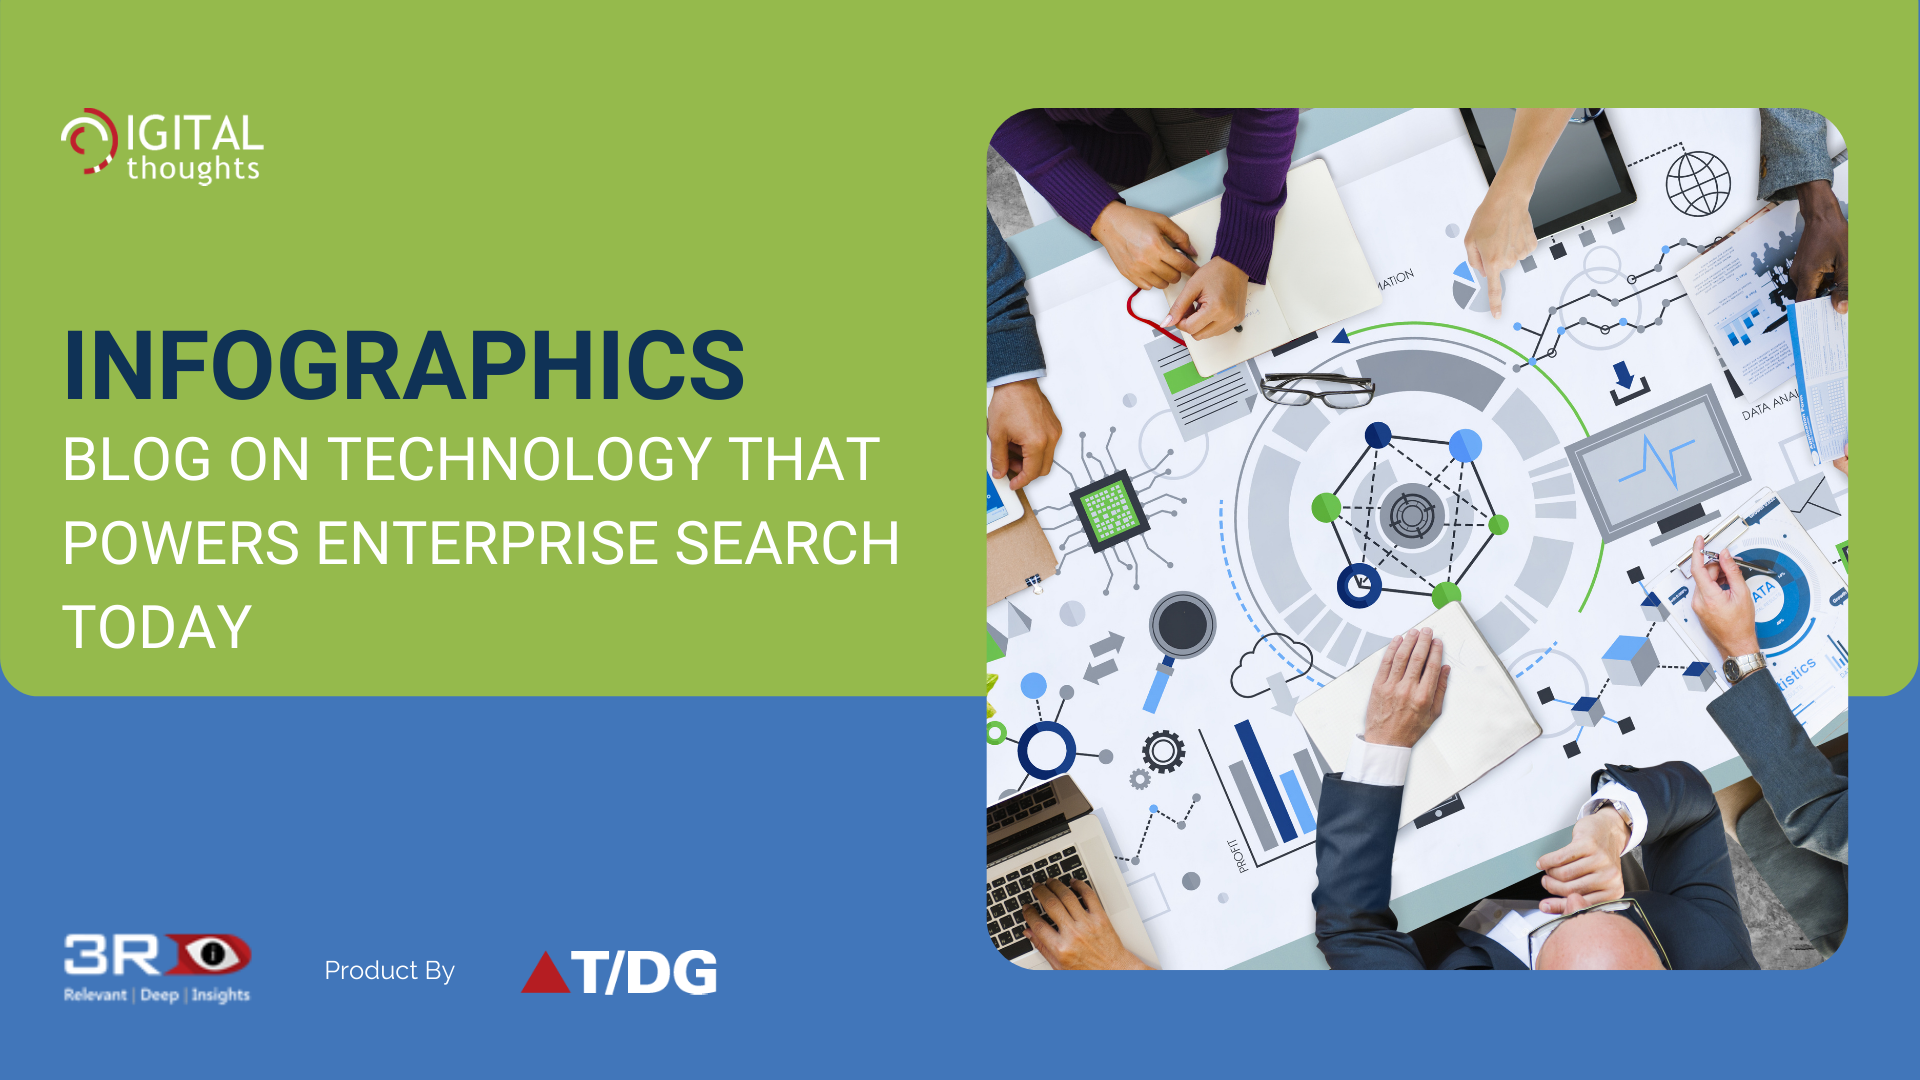 Infographics Blog on Technologies that Power Enterprise Search Tools Today